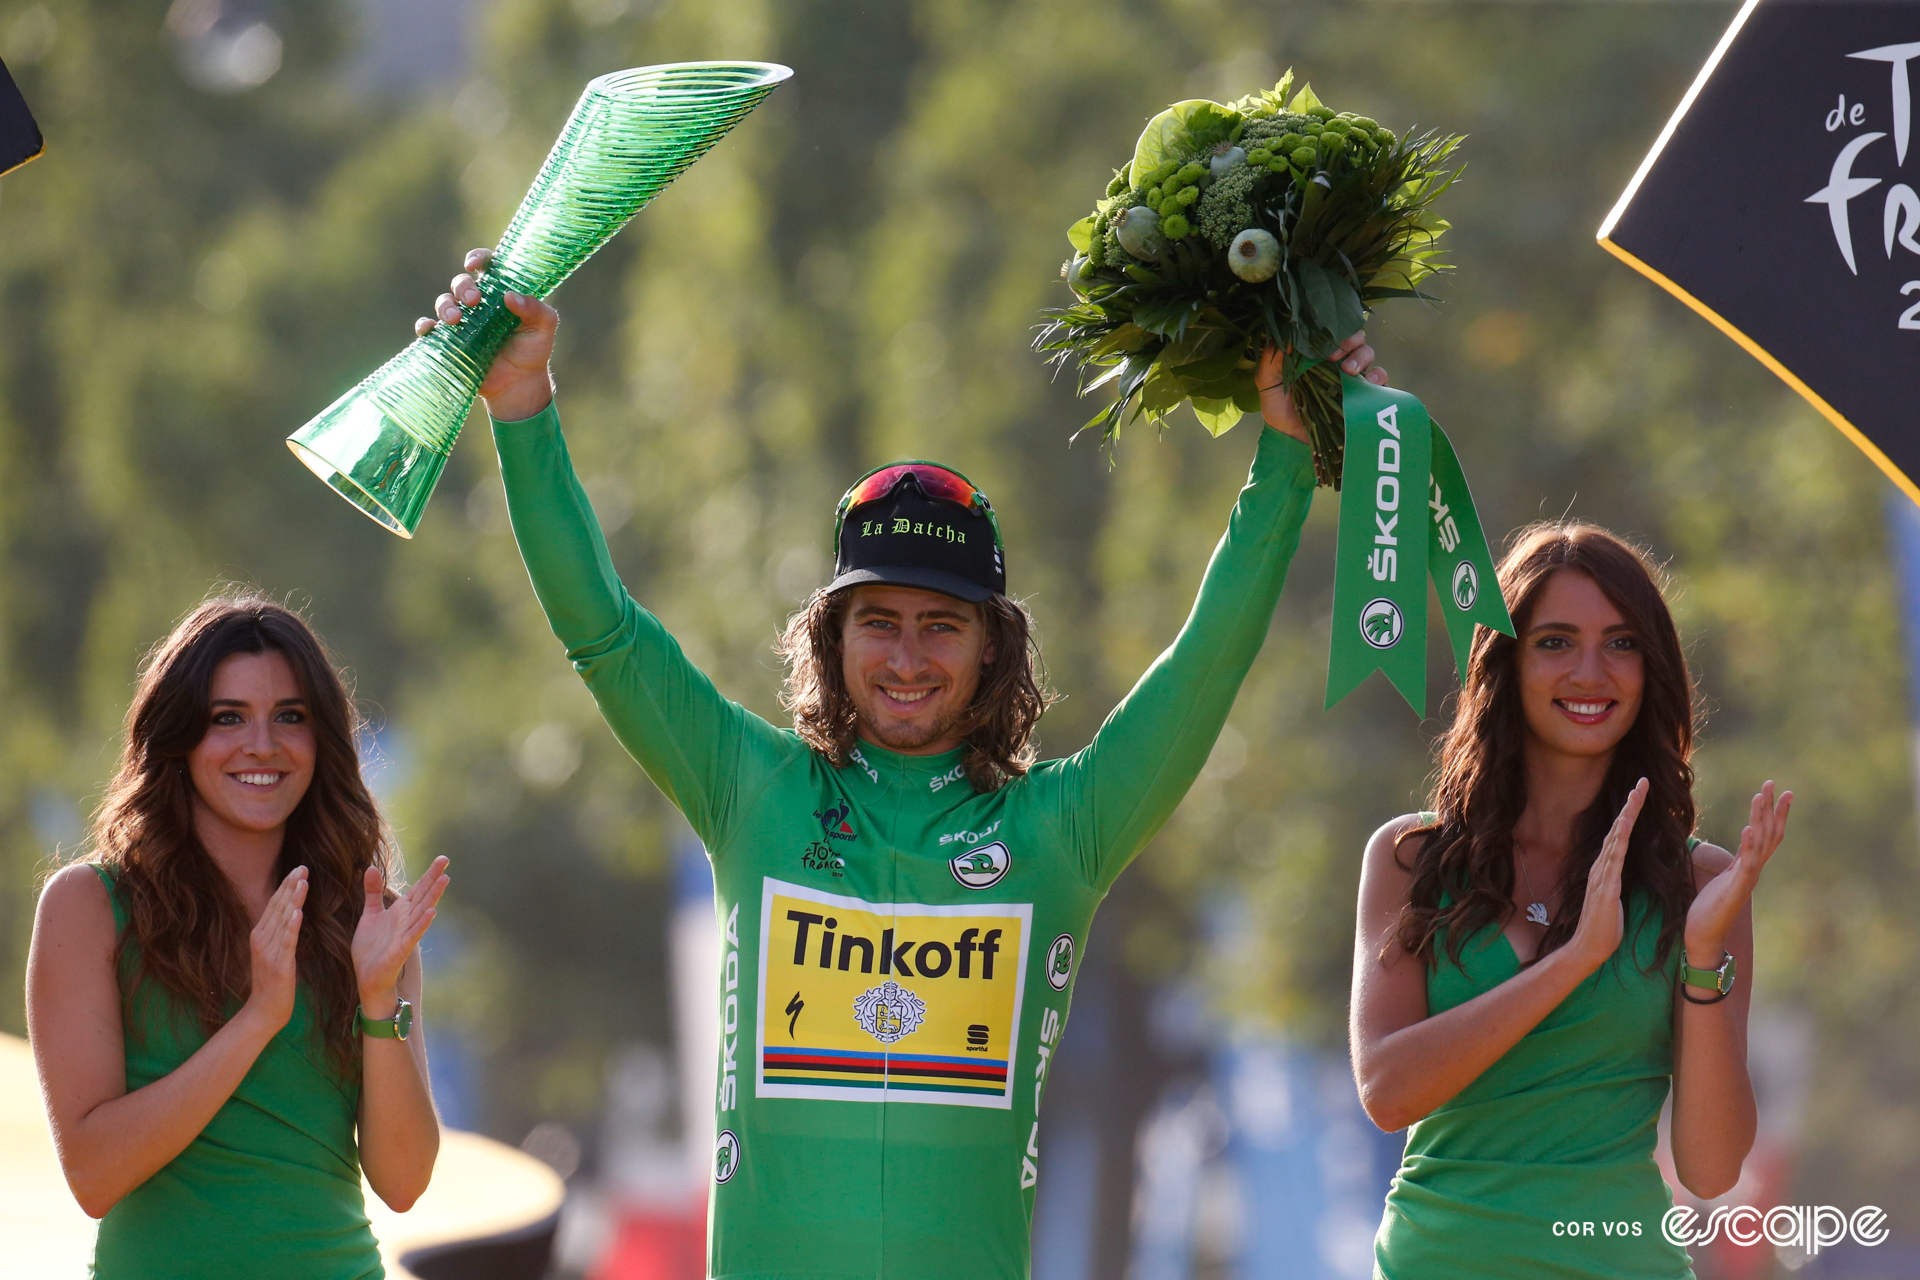 Peter Sagan on the final podium at the 2016 Tour de France wearing green, holding a bouquet of flowers and trophy, with a podium hostess on either side of him.